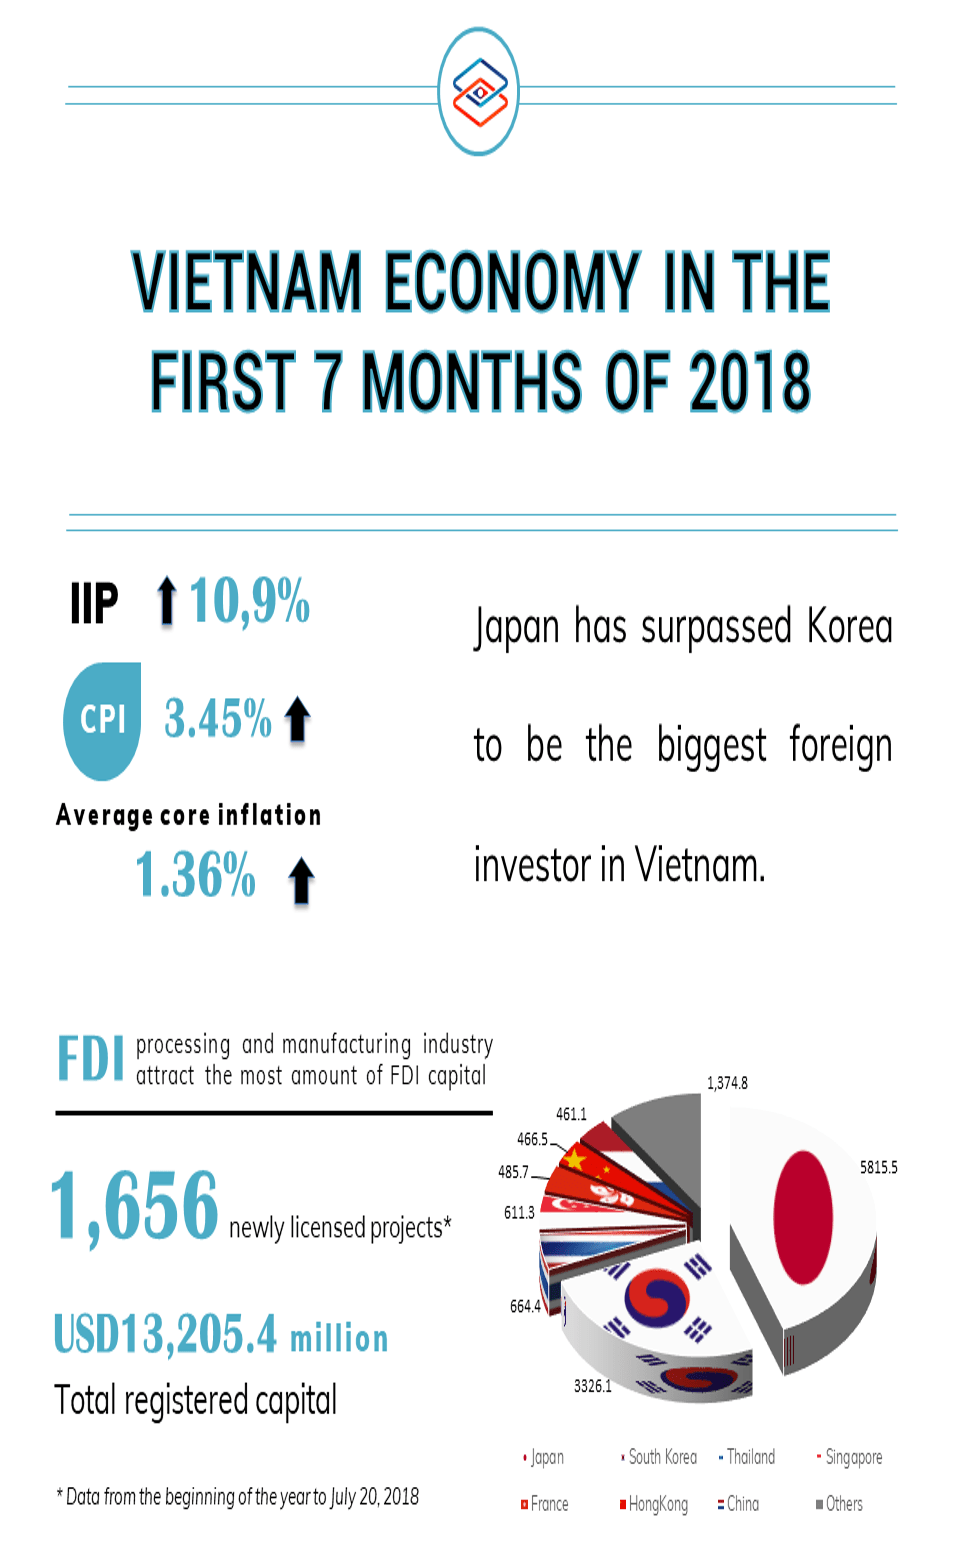 INFOGRAPHIC: VIETNAM ECONOMY IN THE FIRST 7 MONTHS OF 2018